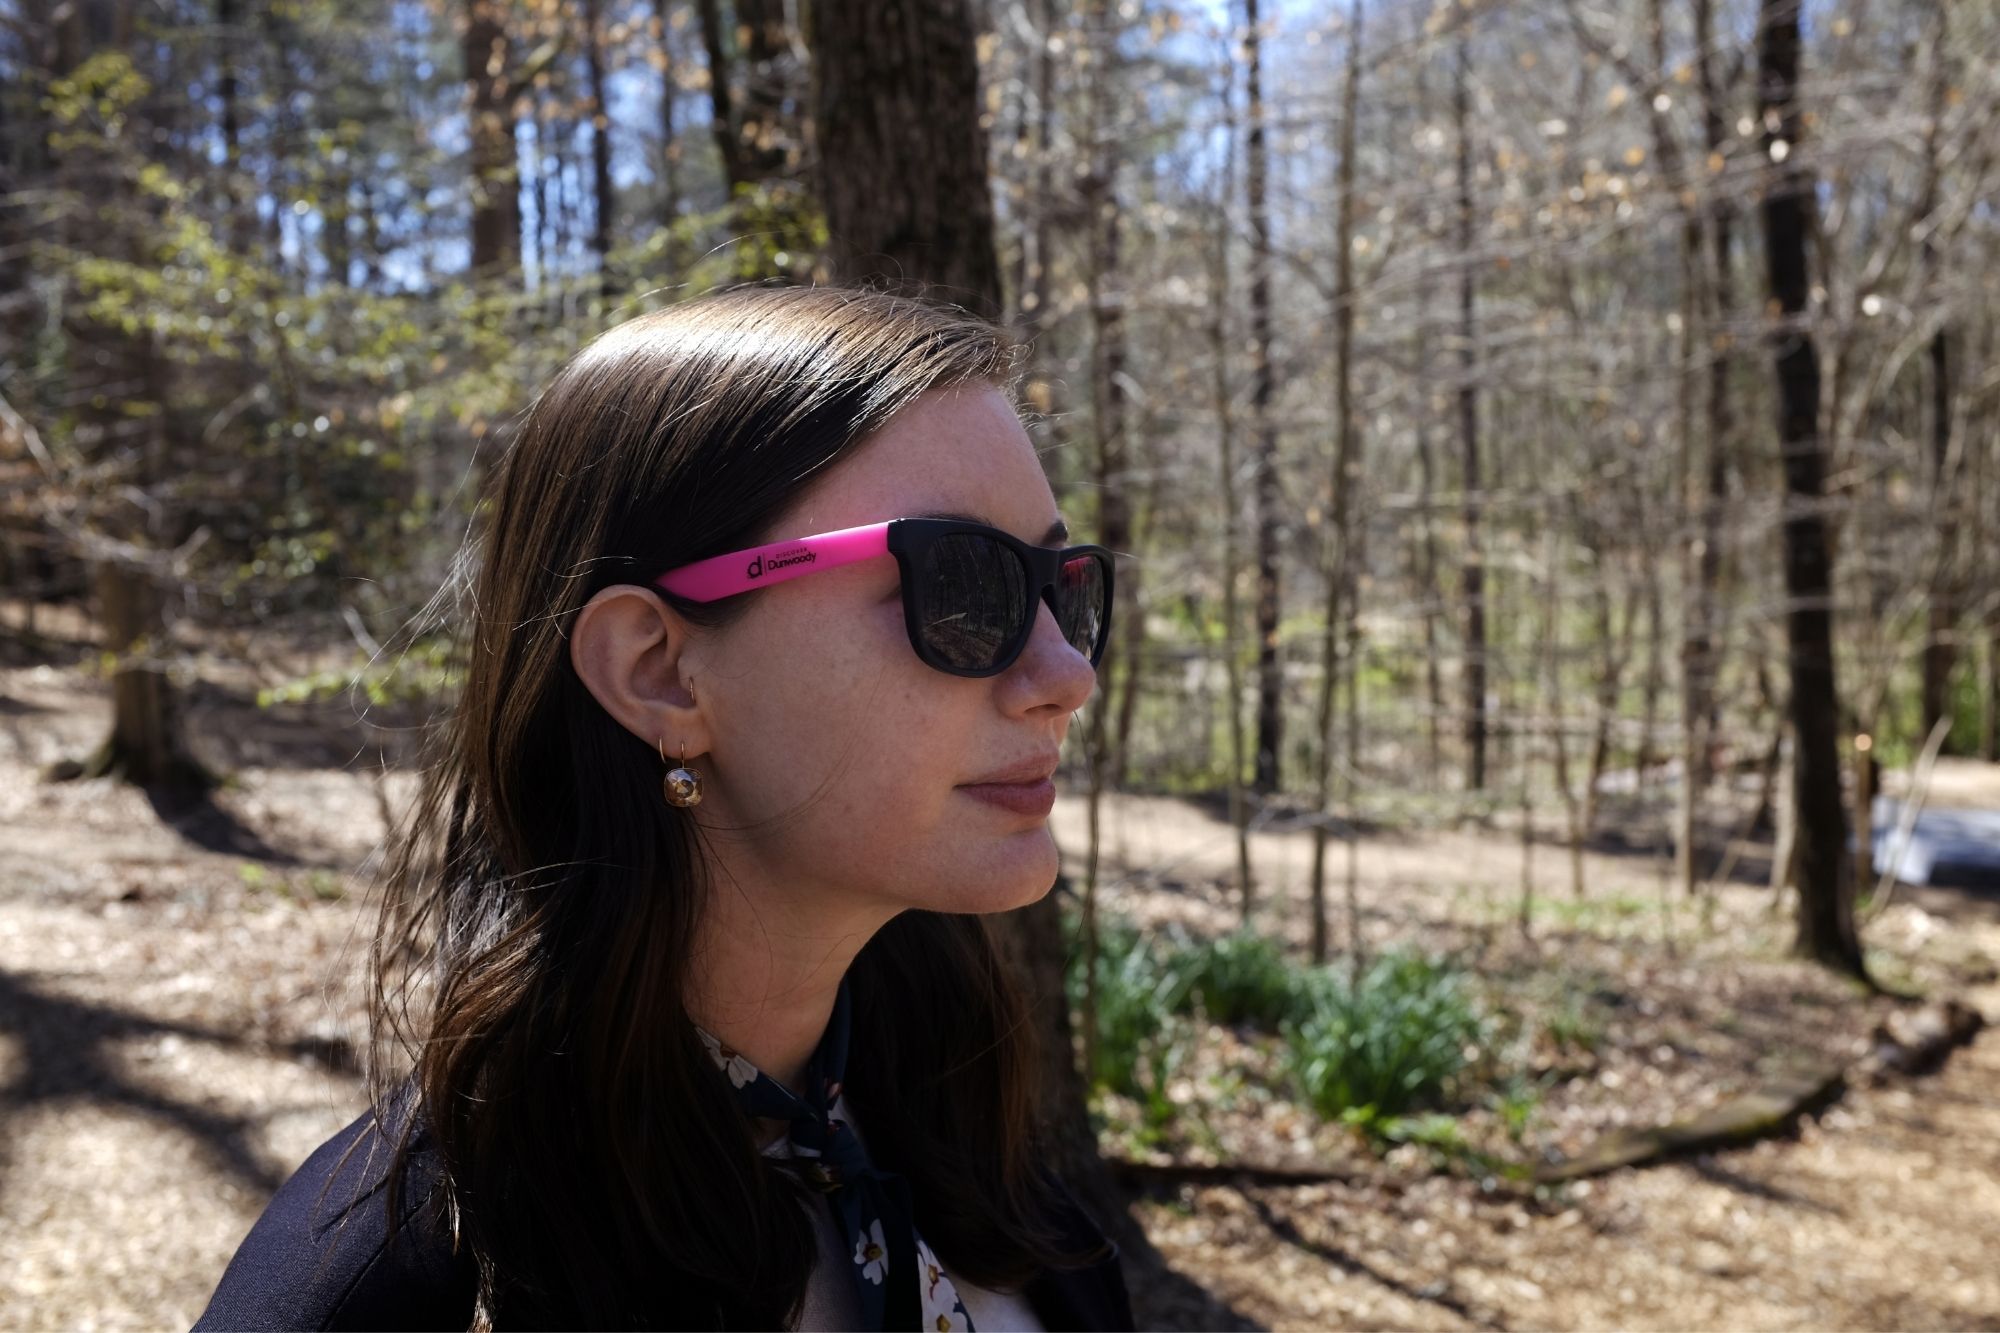 Alyssa wears a pair of sunglasses with Discover Dunwoody printed on the side